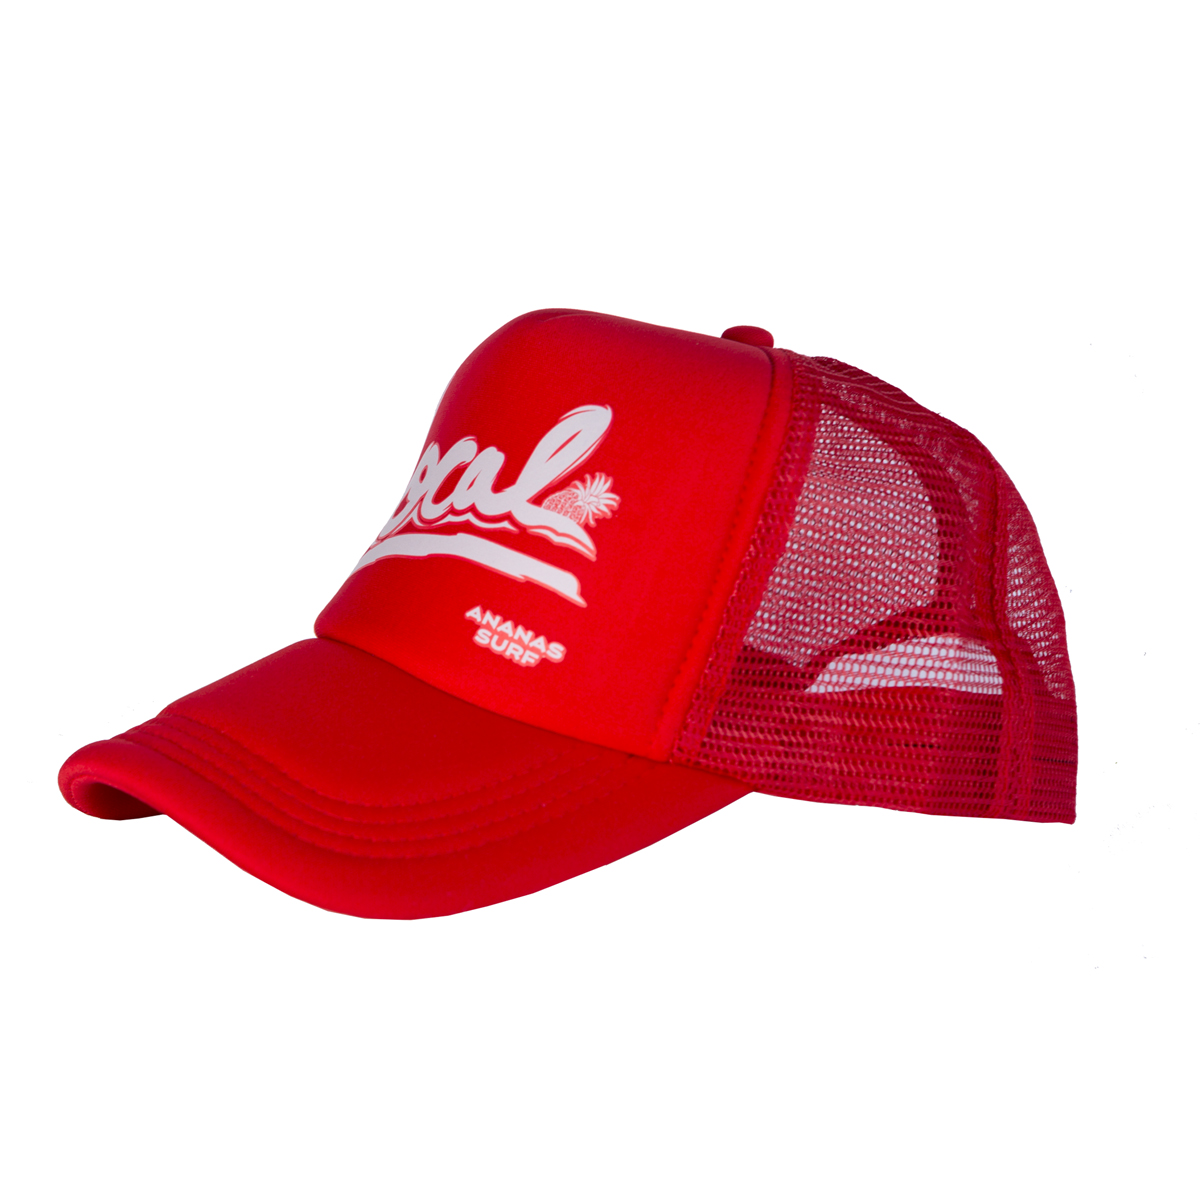 Ananas Surf The Local beach mesh cap red side